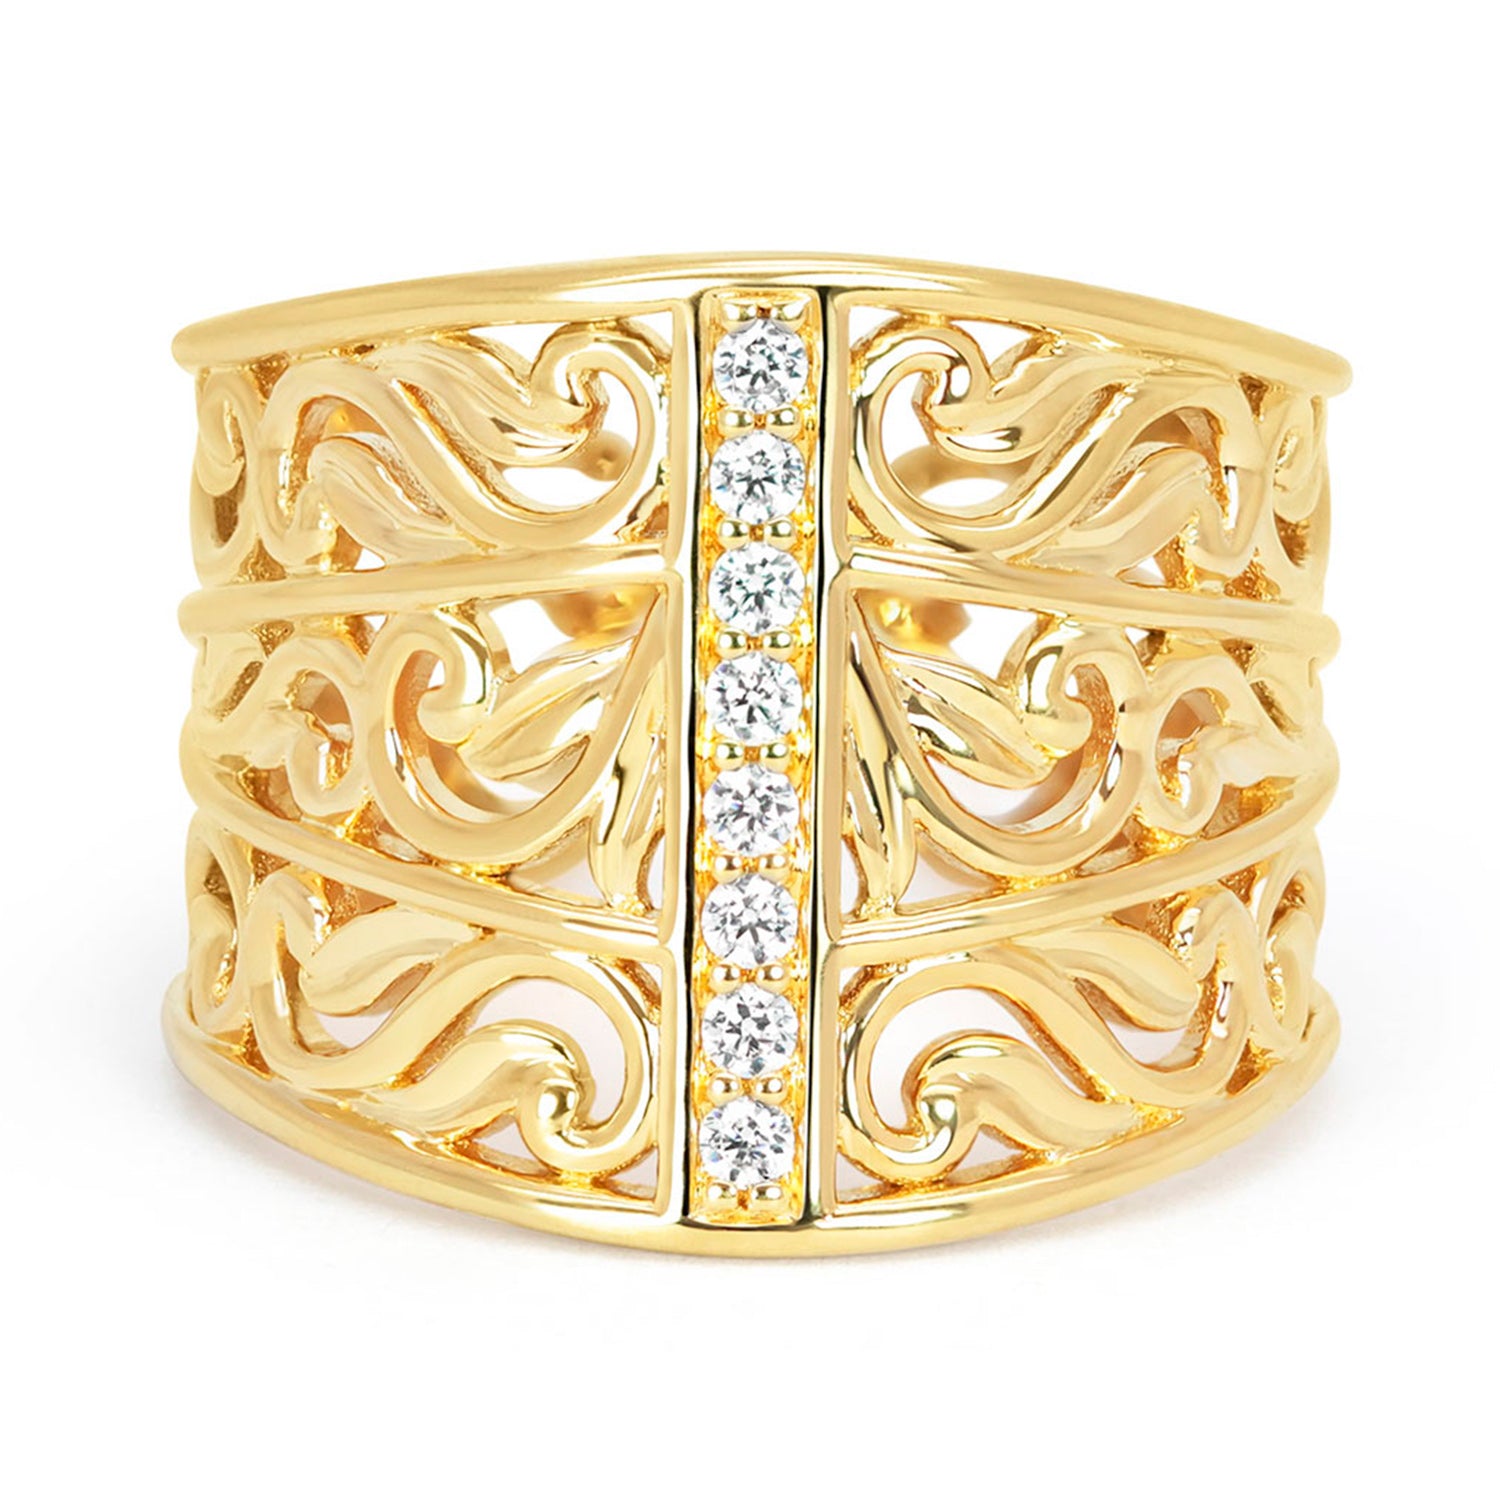 Artisan Filigree Ethical Gold Marquise Commitment Ring, 18ct Fairmined Ecological Gold and conflict-free diamonds, front